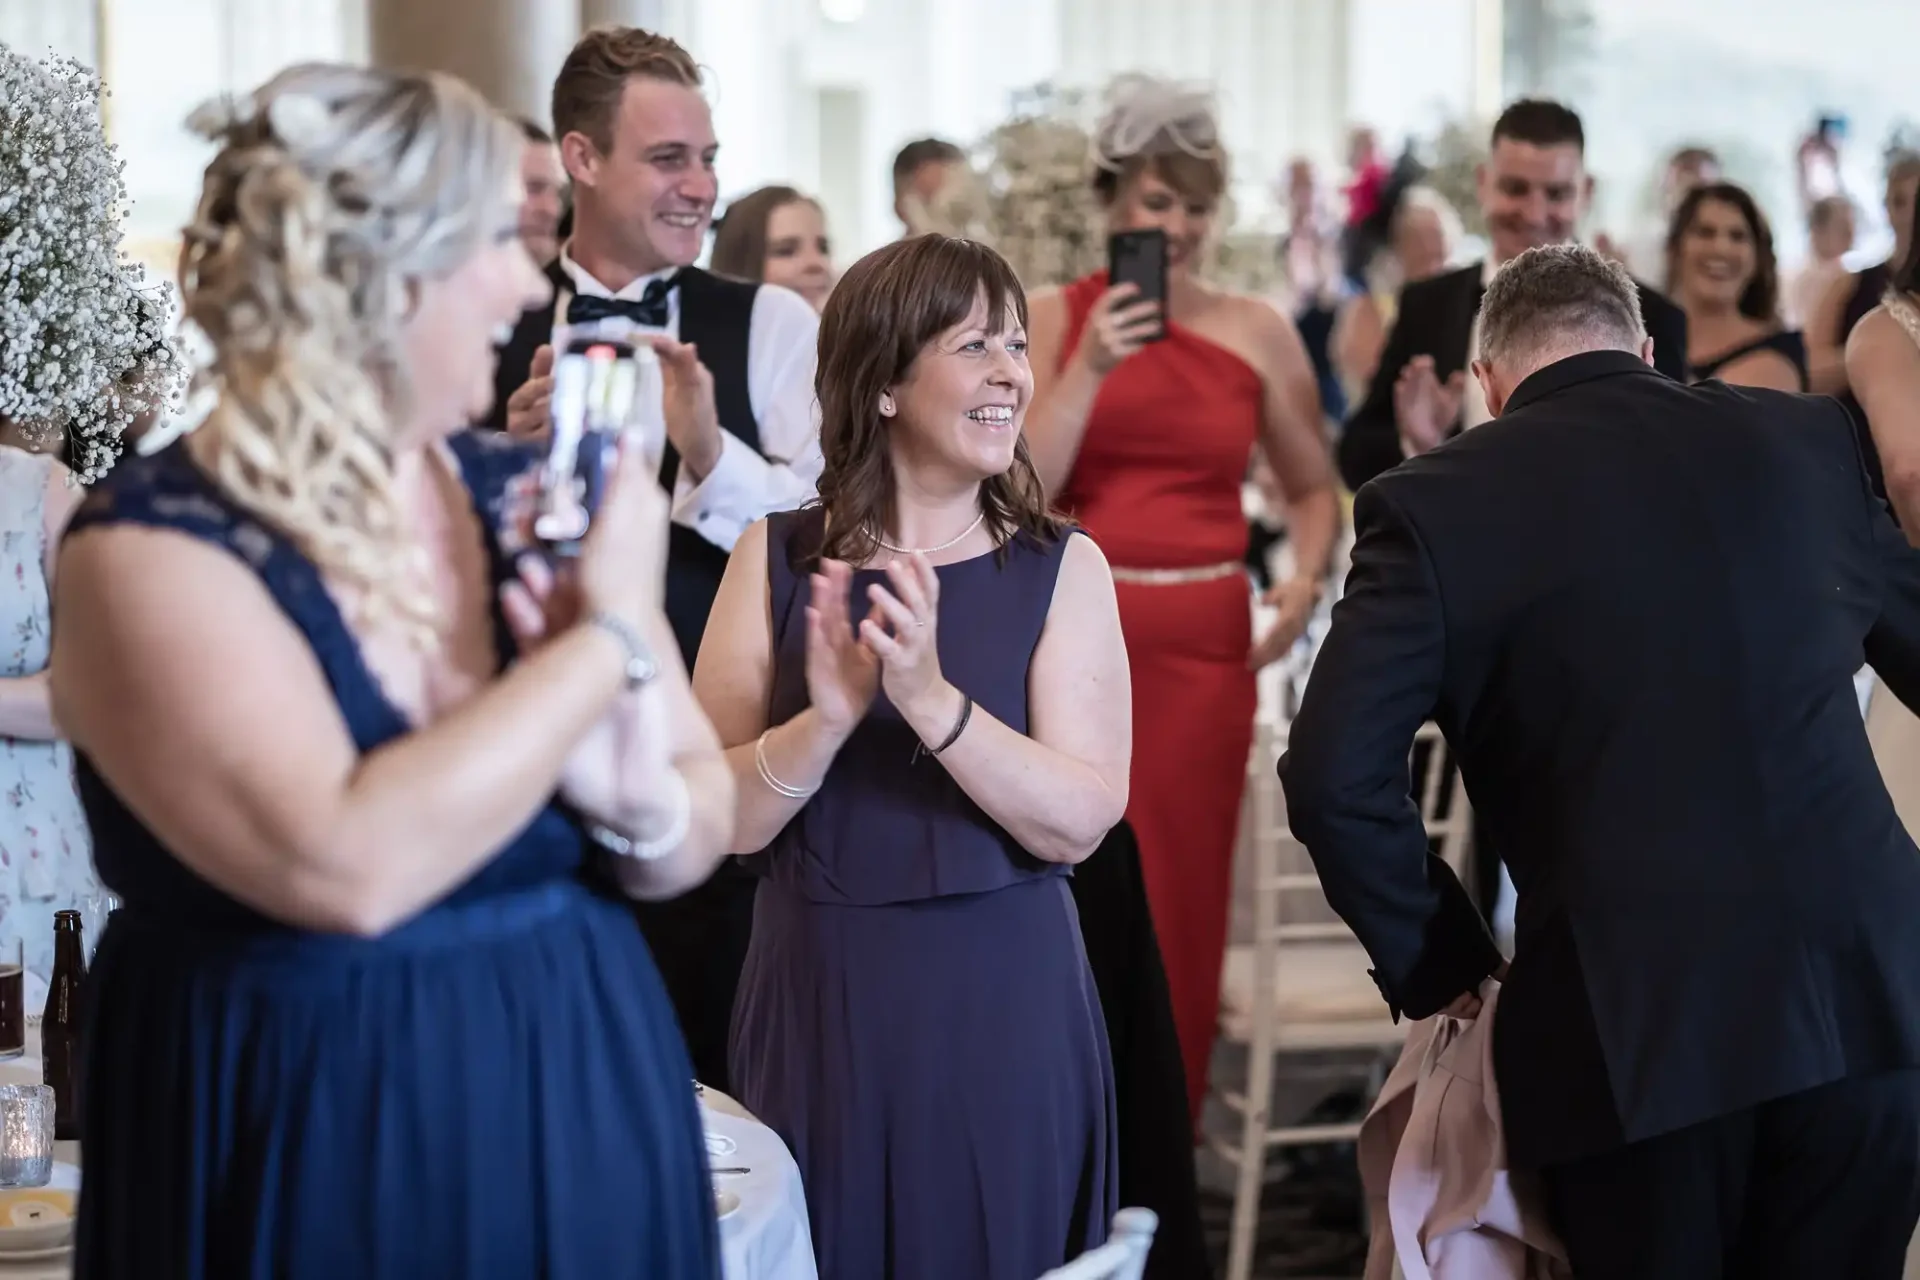 Guests smiling and clapping at a wedding reception, with some capturing the moment on their phones.